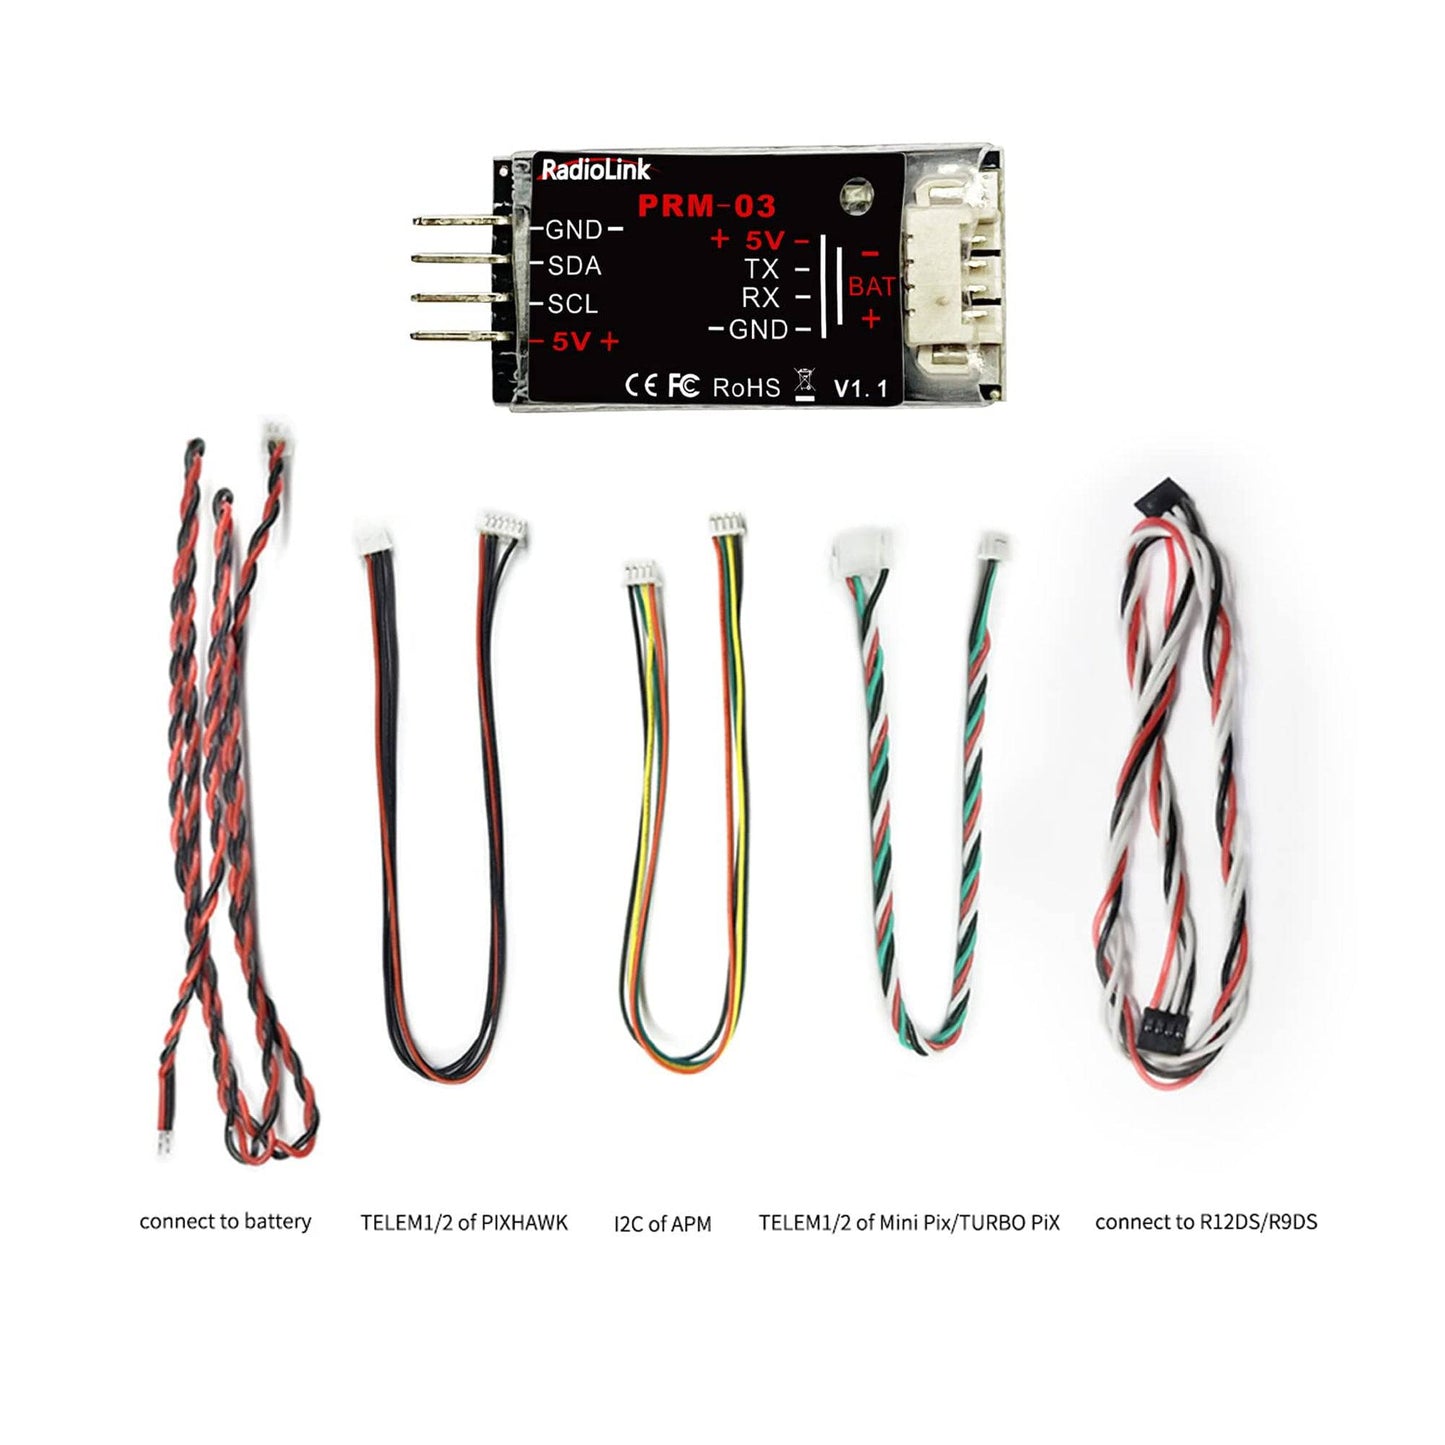 Radiolink PRM-03 Telemetry Module Real-time OSD Information